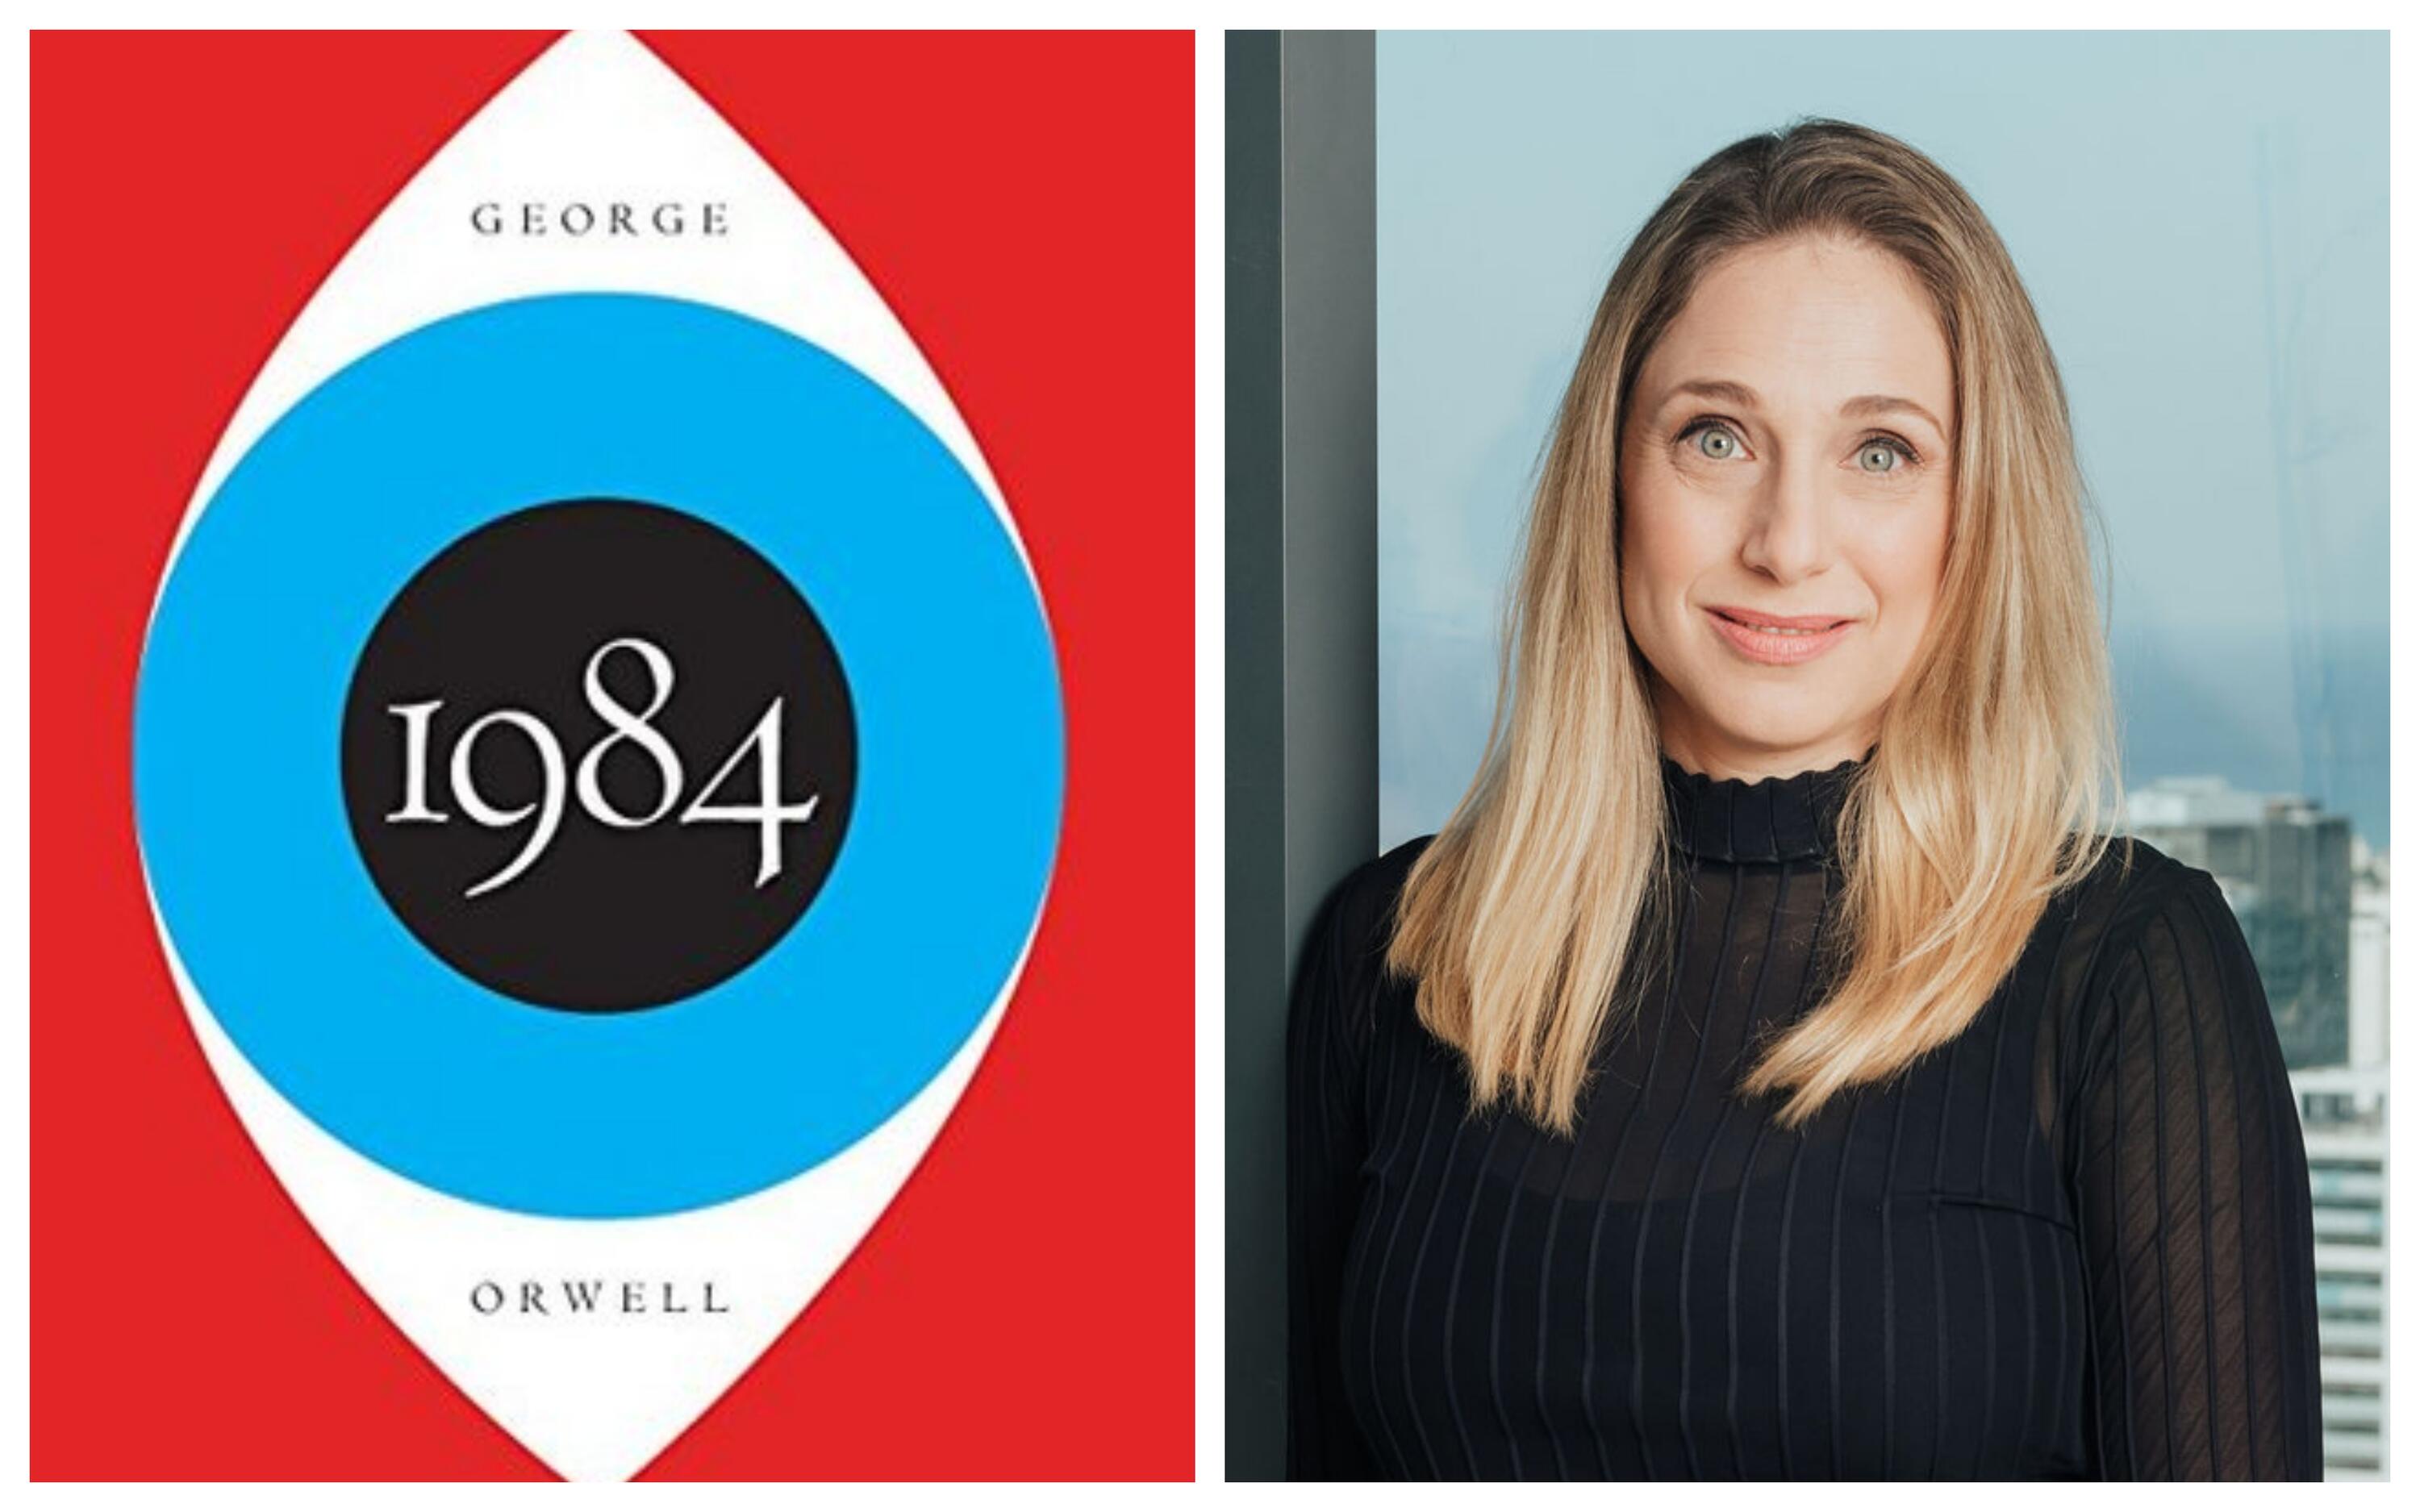 CTech's Book Review: 1984 - an entrepreneur's warning about privacy